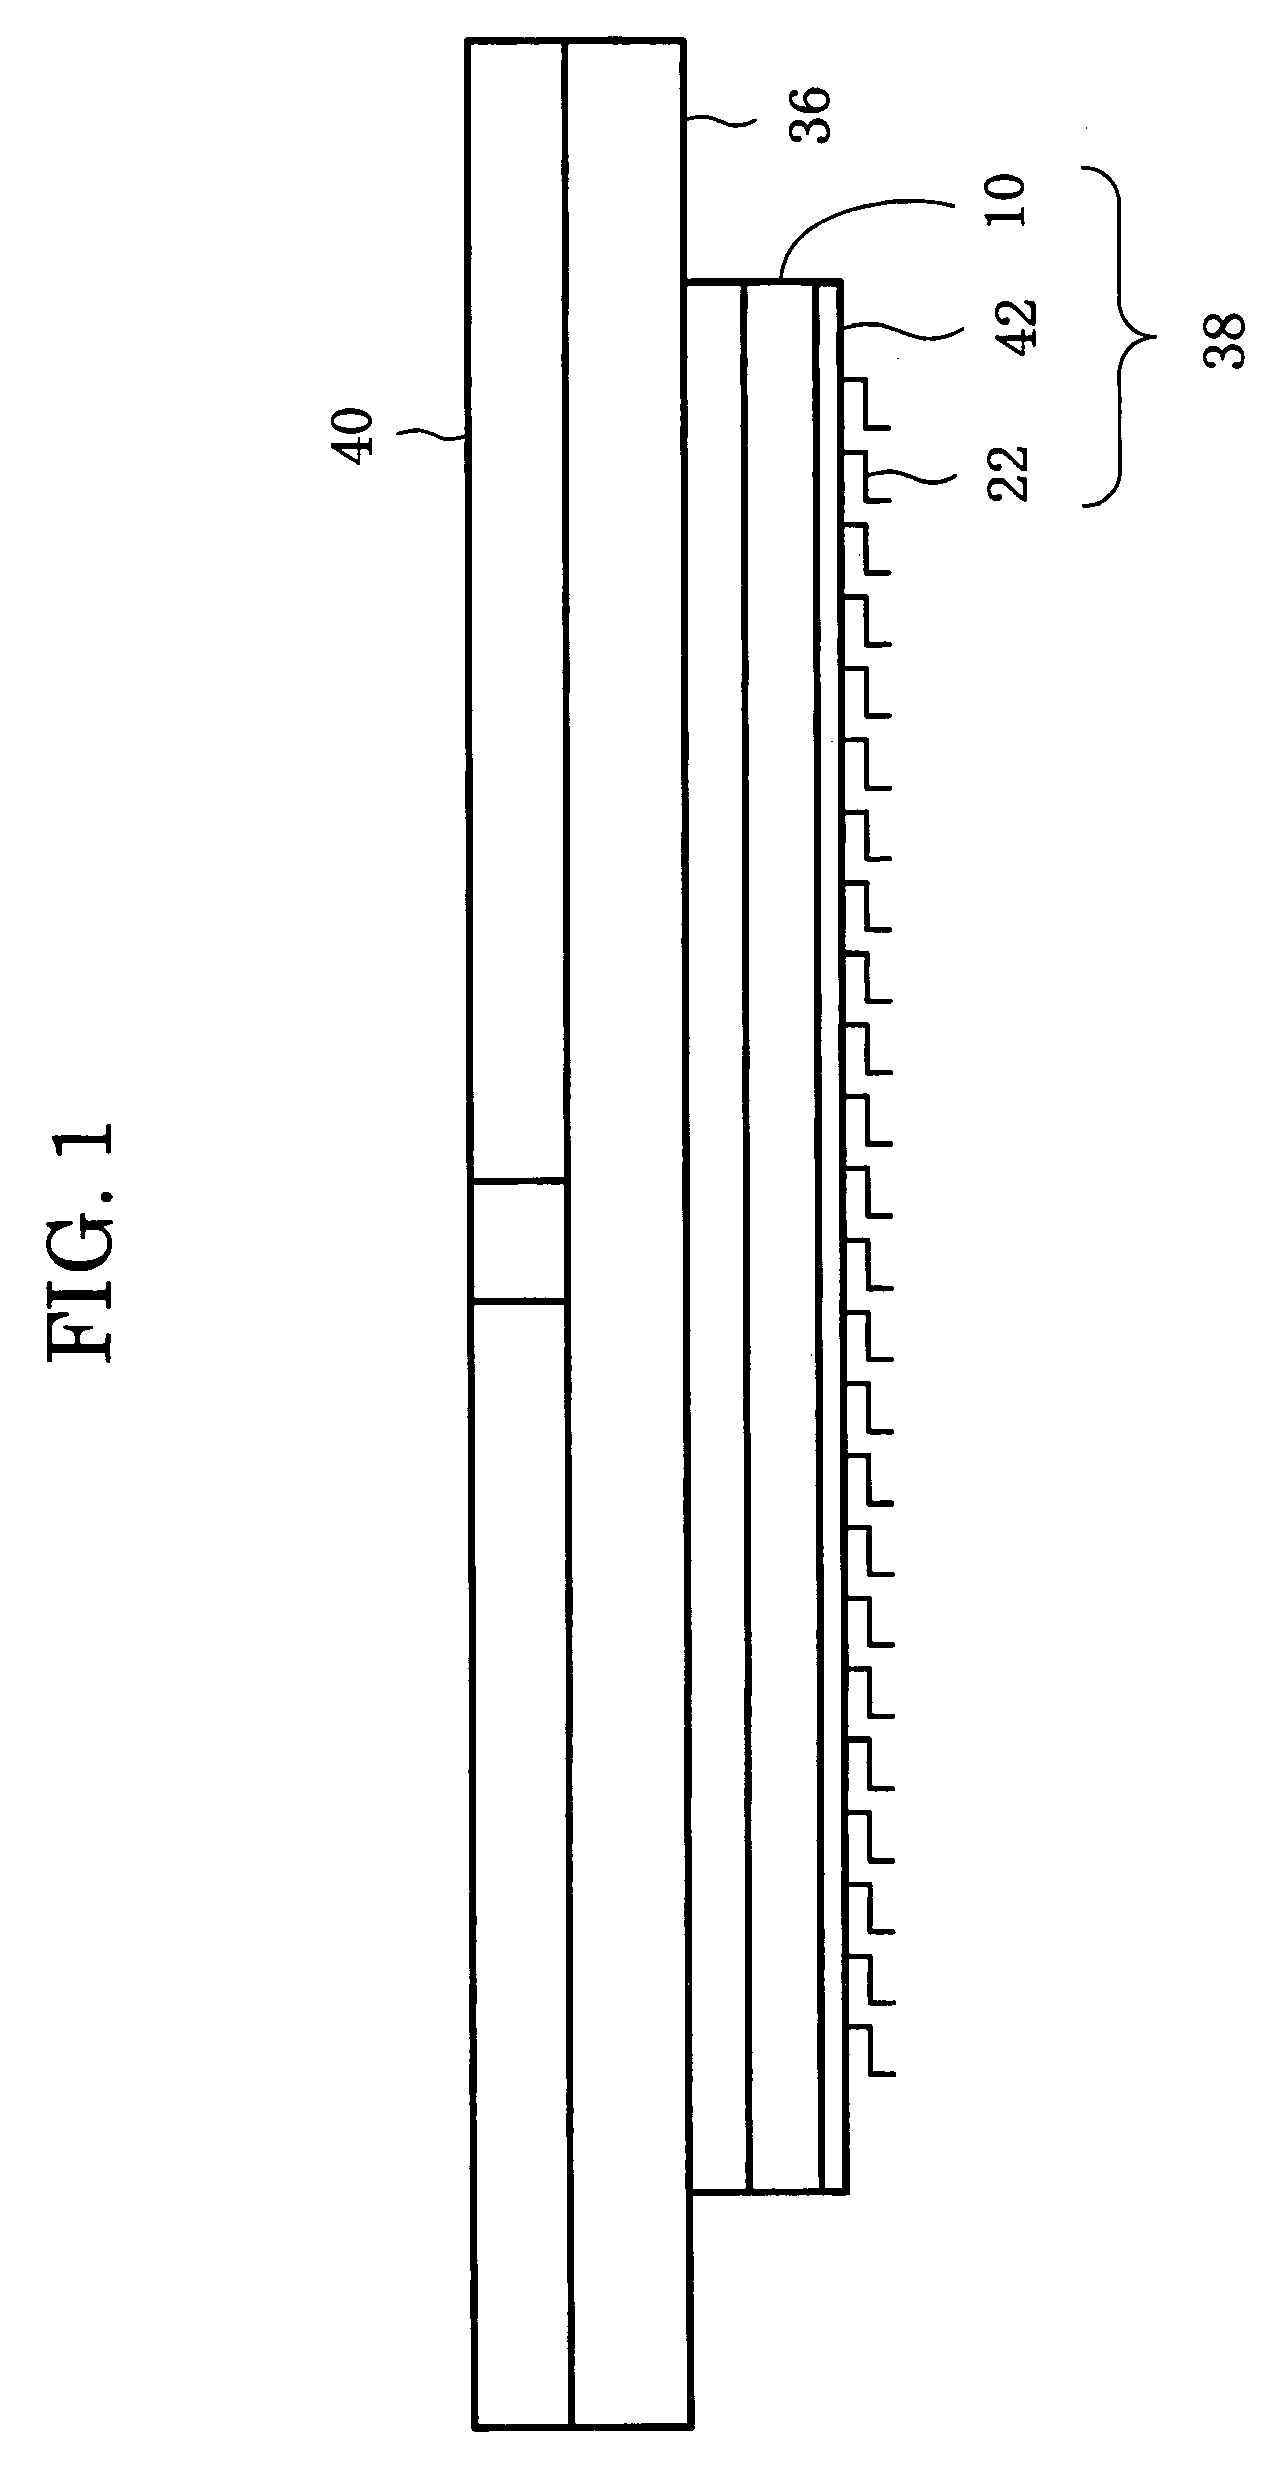 Probe unit substrate